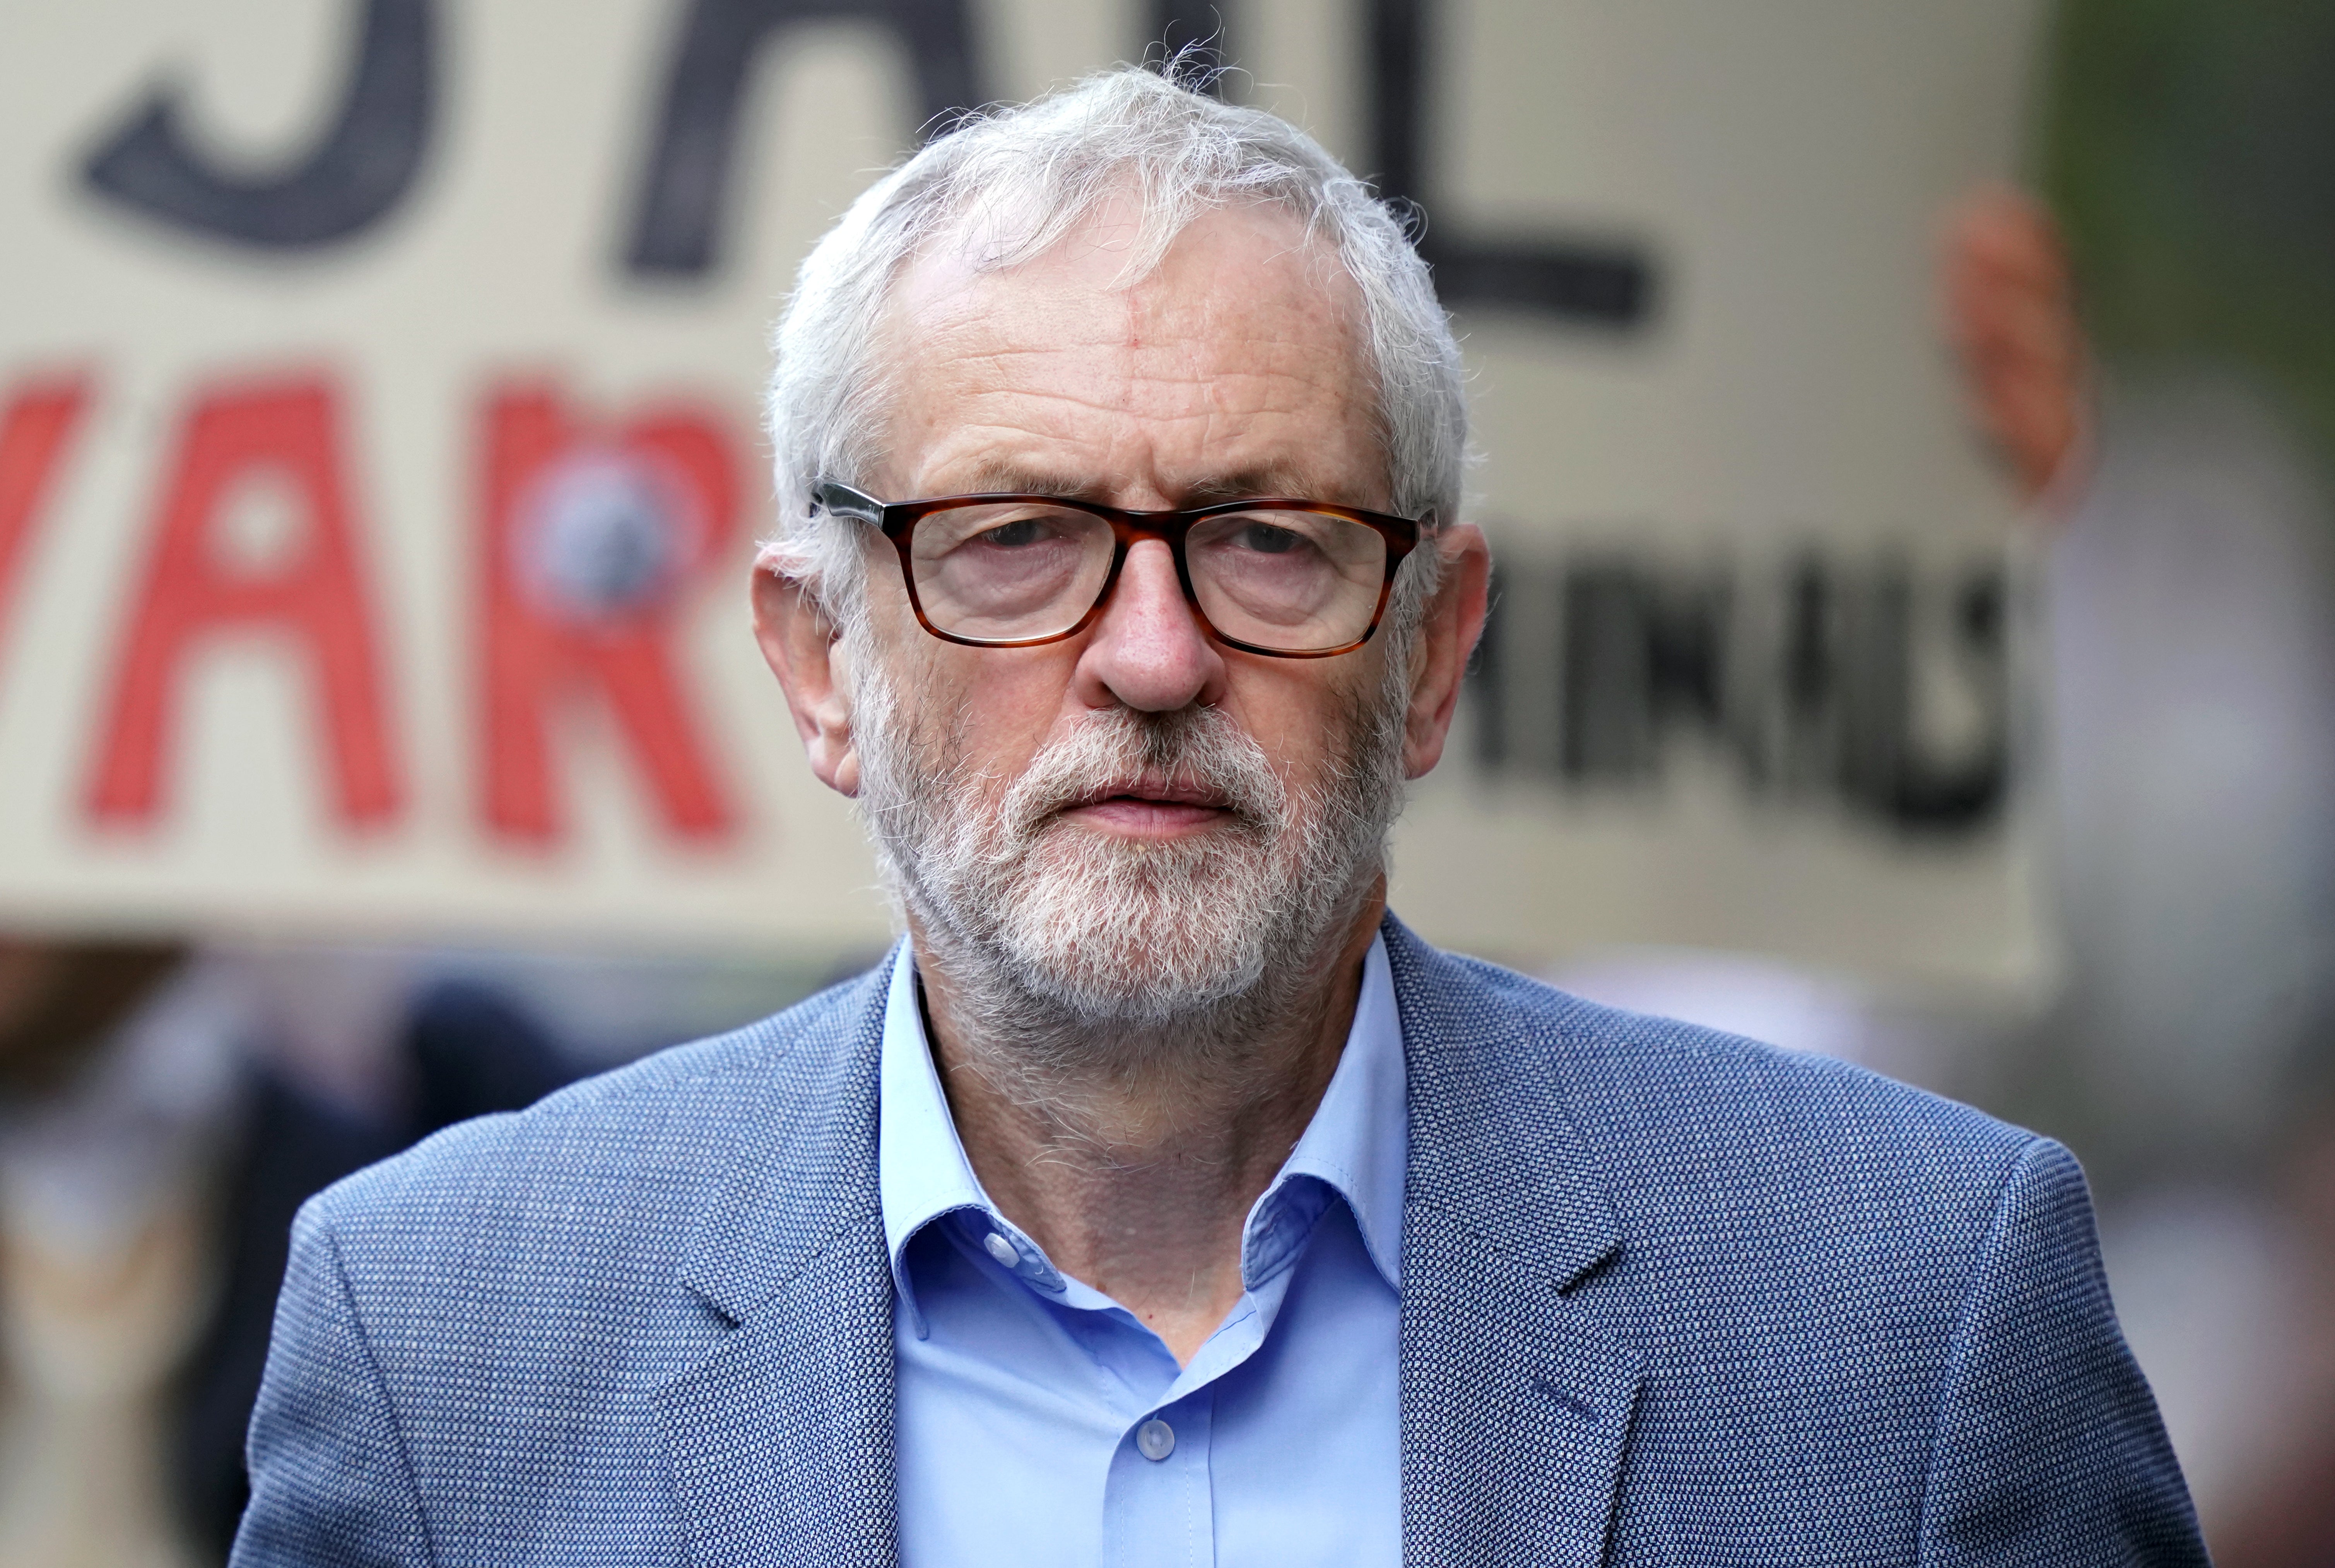 Who will take up Jeremy Corbyn’s torch?